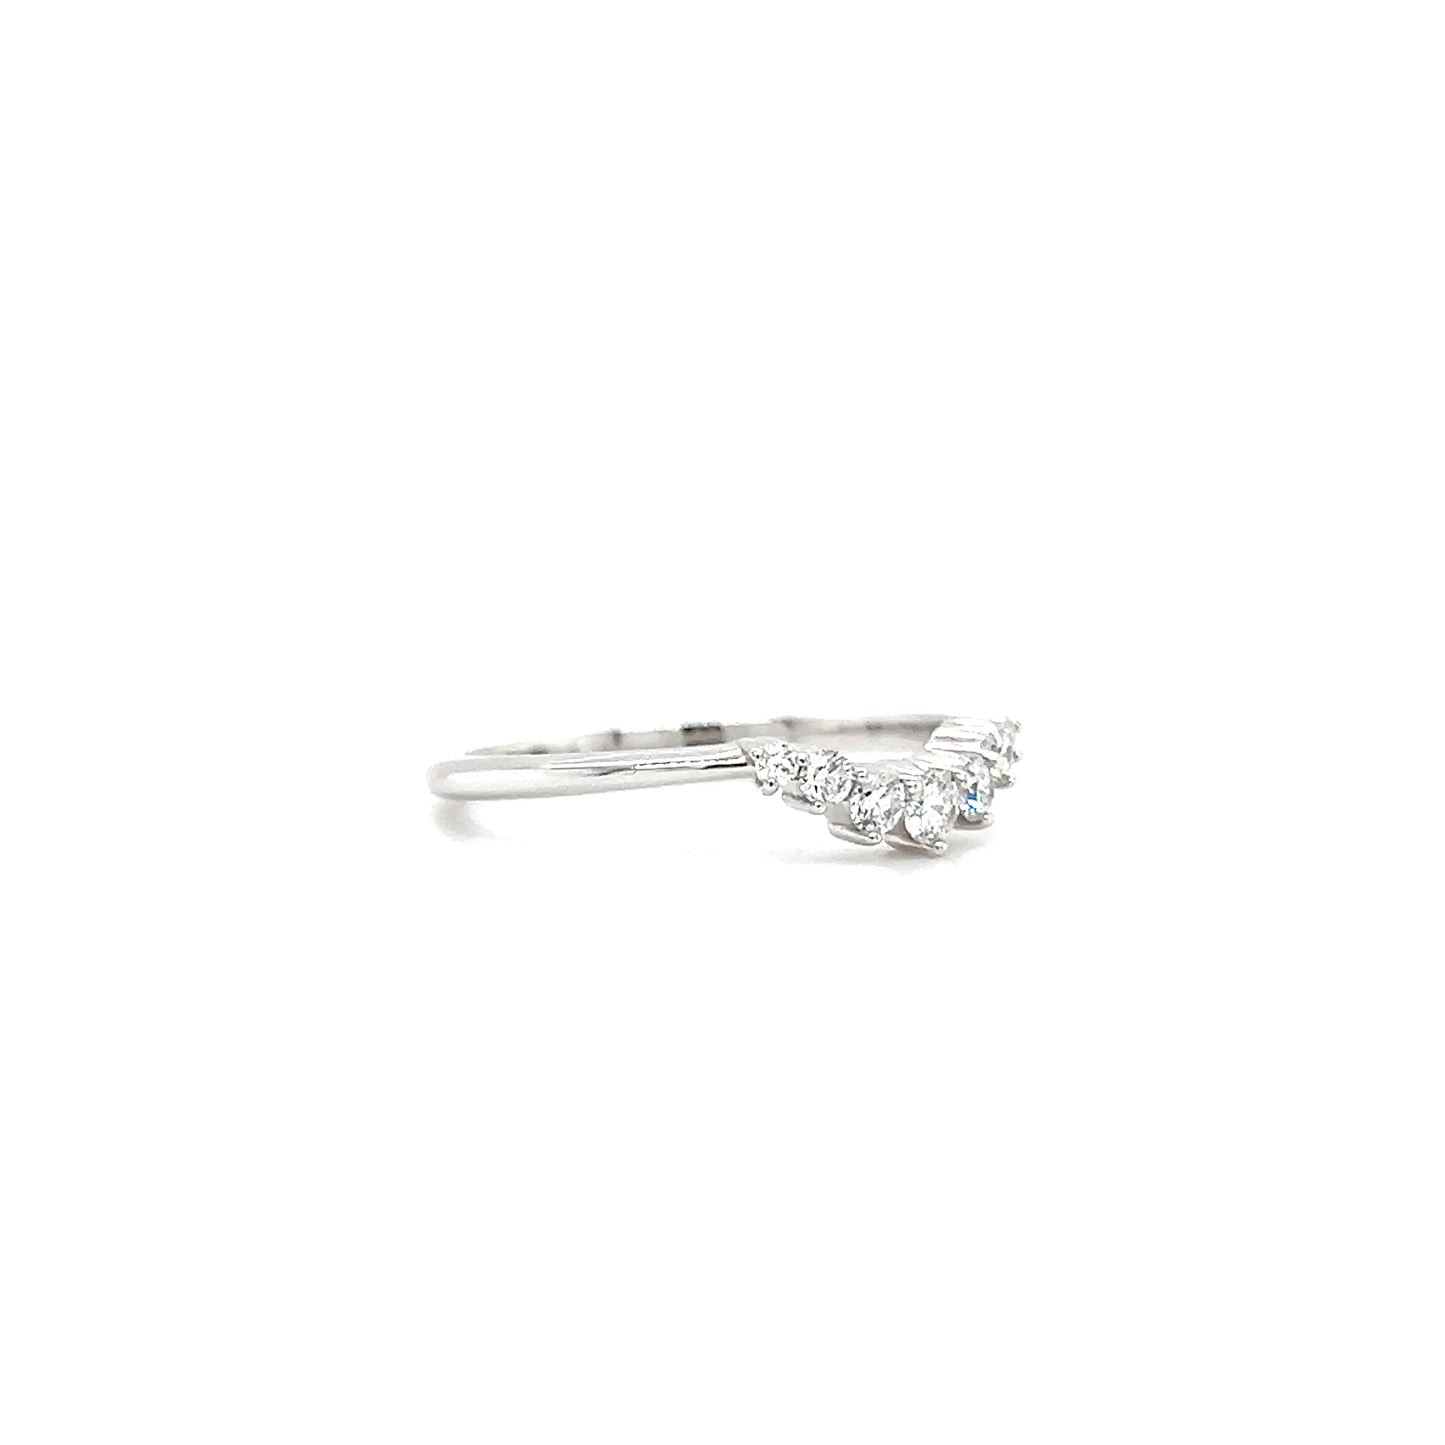 Diamond Contour Ring with 0.2ctw of Diamonds in 14K White Gold Left ide View